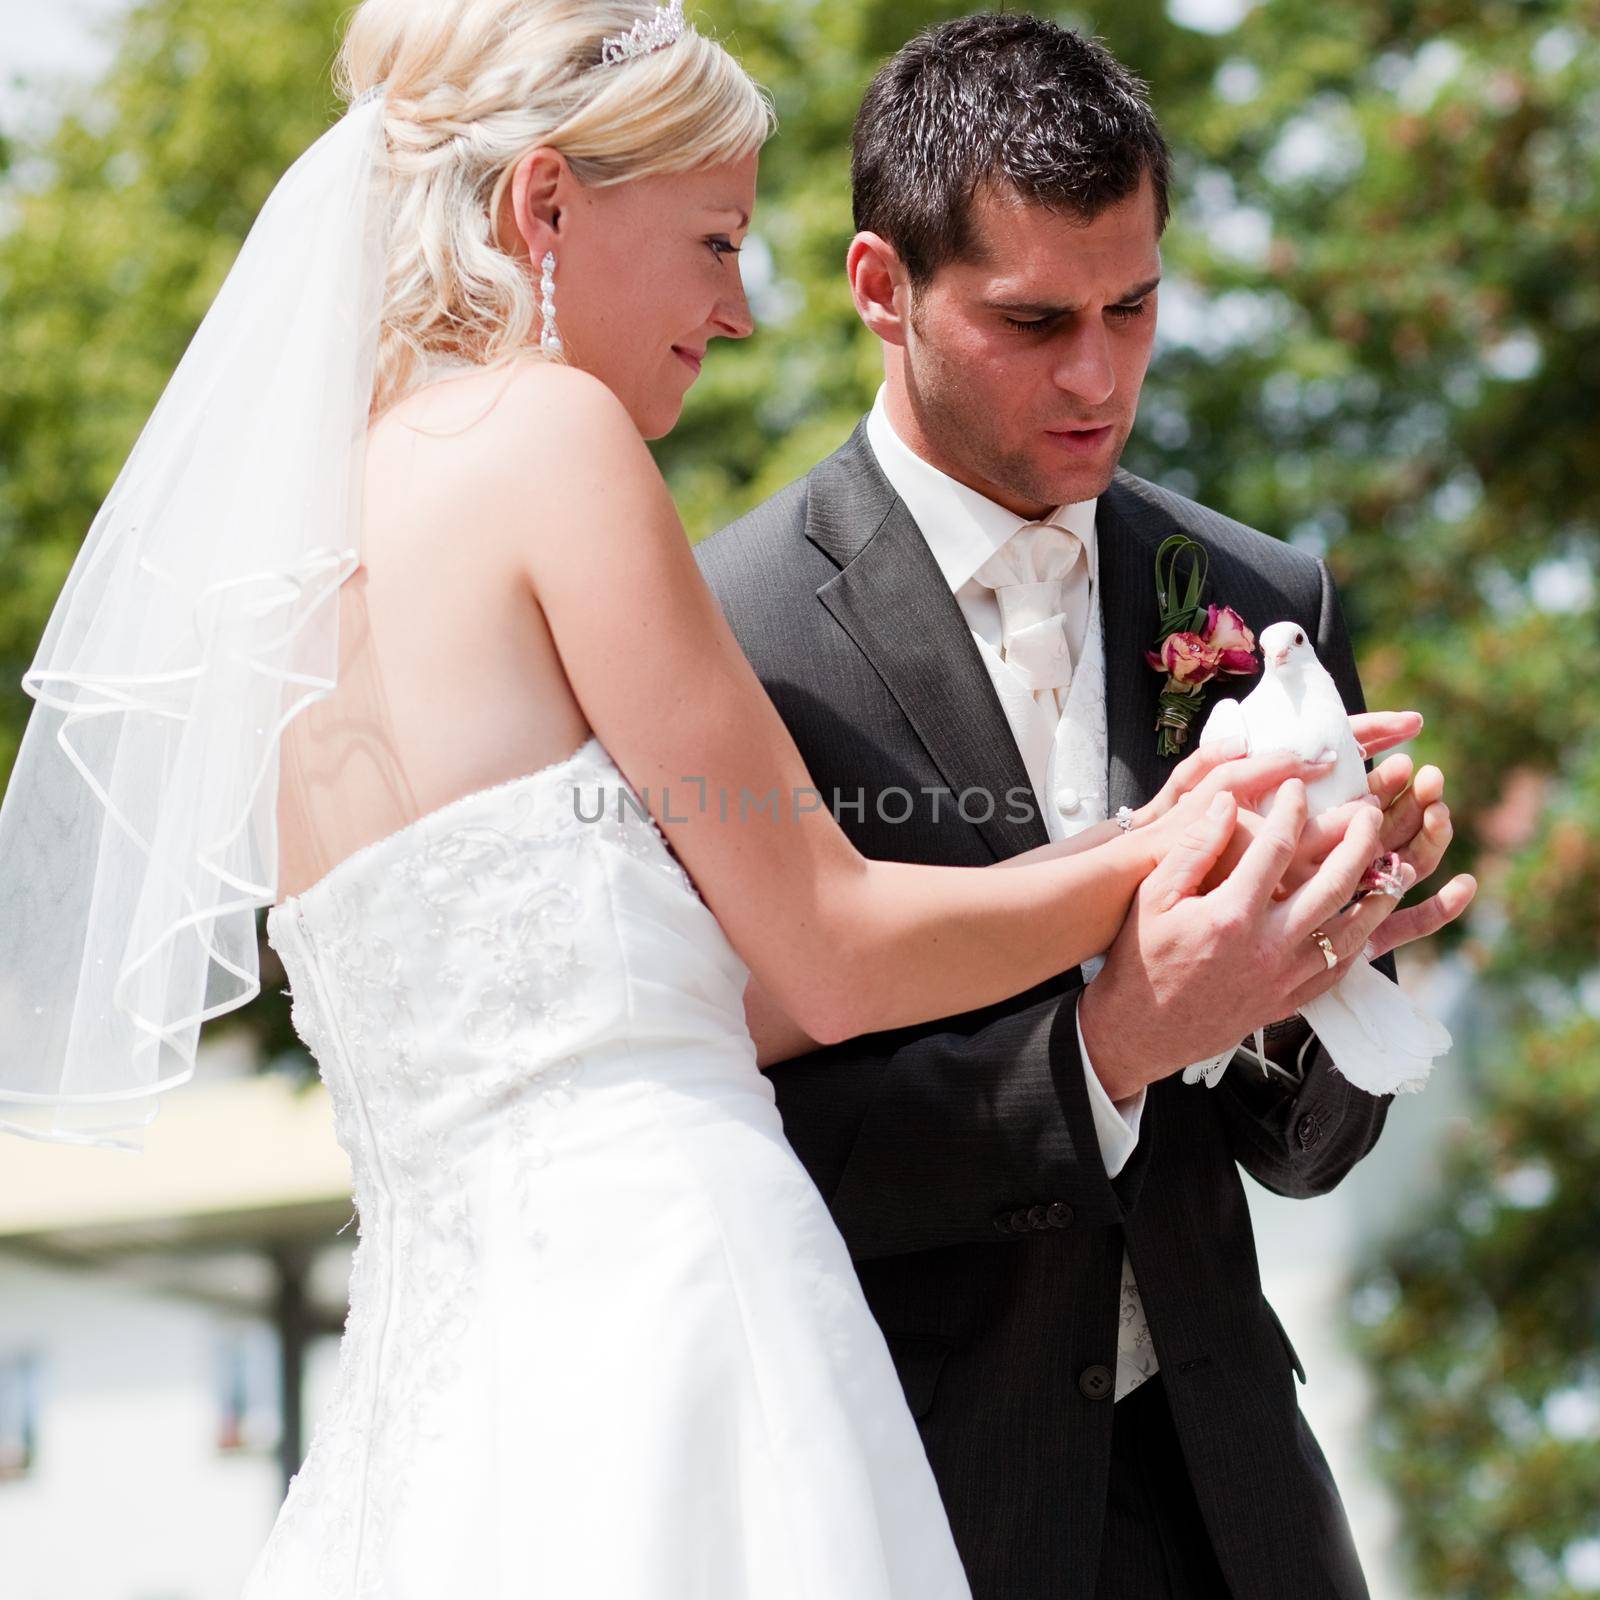 Happy wedding couple, they are holding doves in their hands and want to let them fly free as a symbol of love